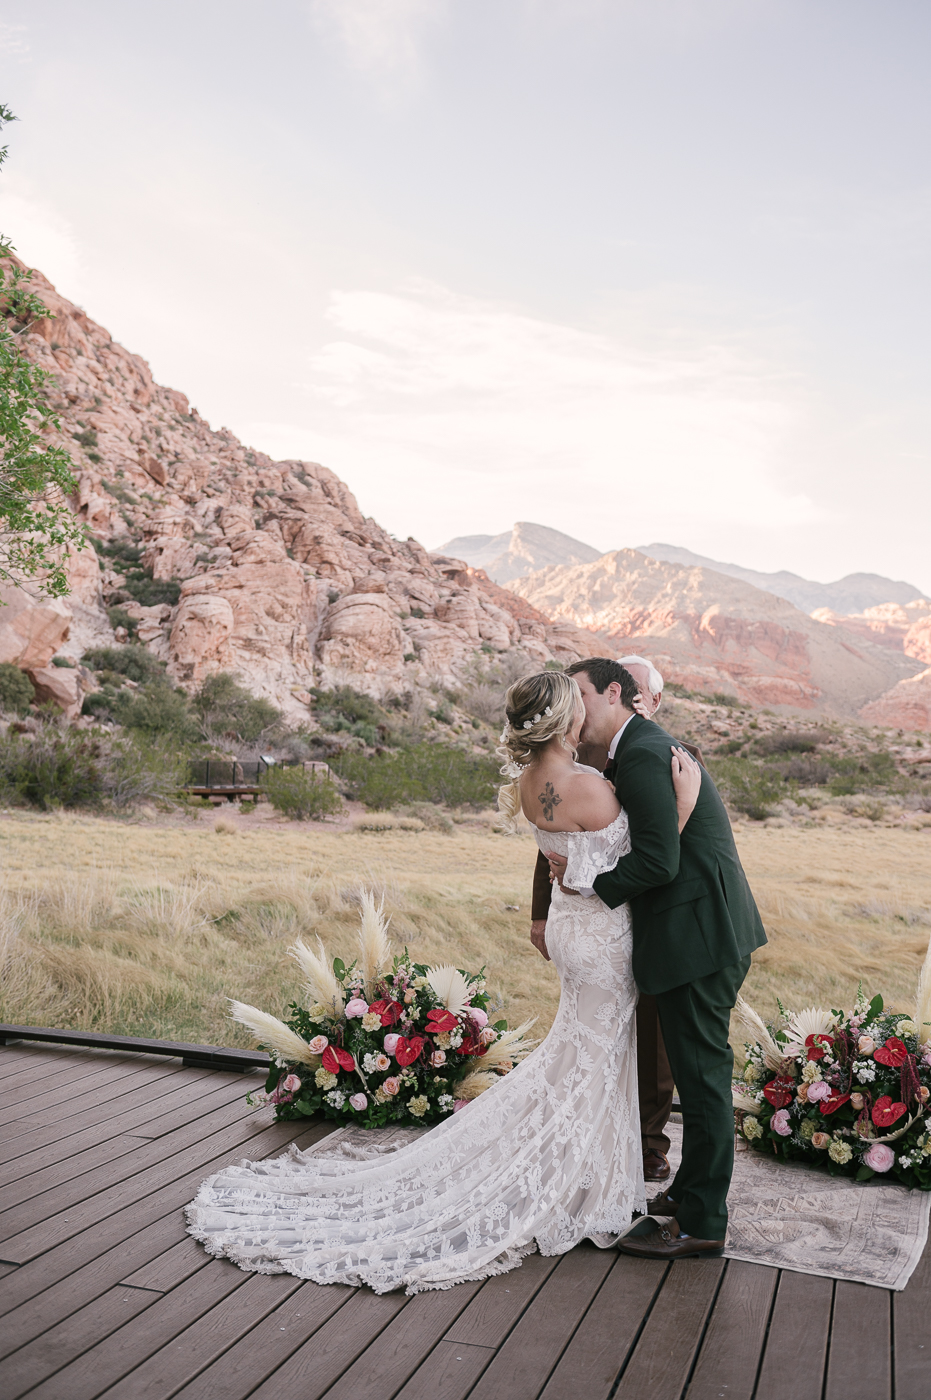 Couple sharing a kiss during their elopement ceremony arranged by Elopement Las Vegas